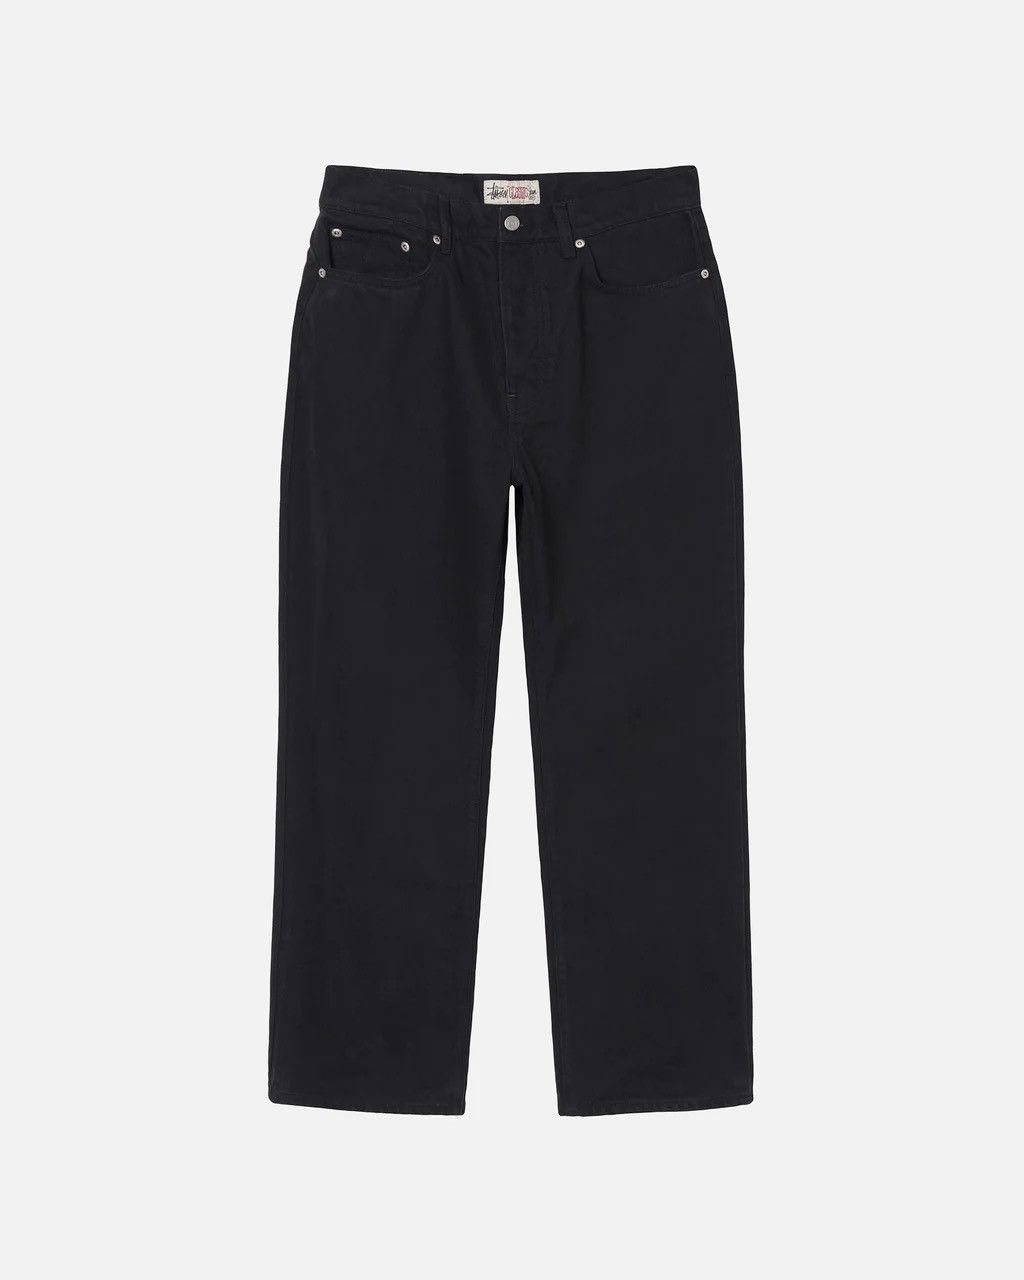 Stussy STUSSY WORK PANT ALFONSO CANVAS | Grailed